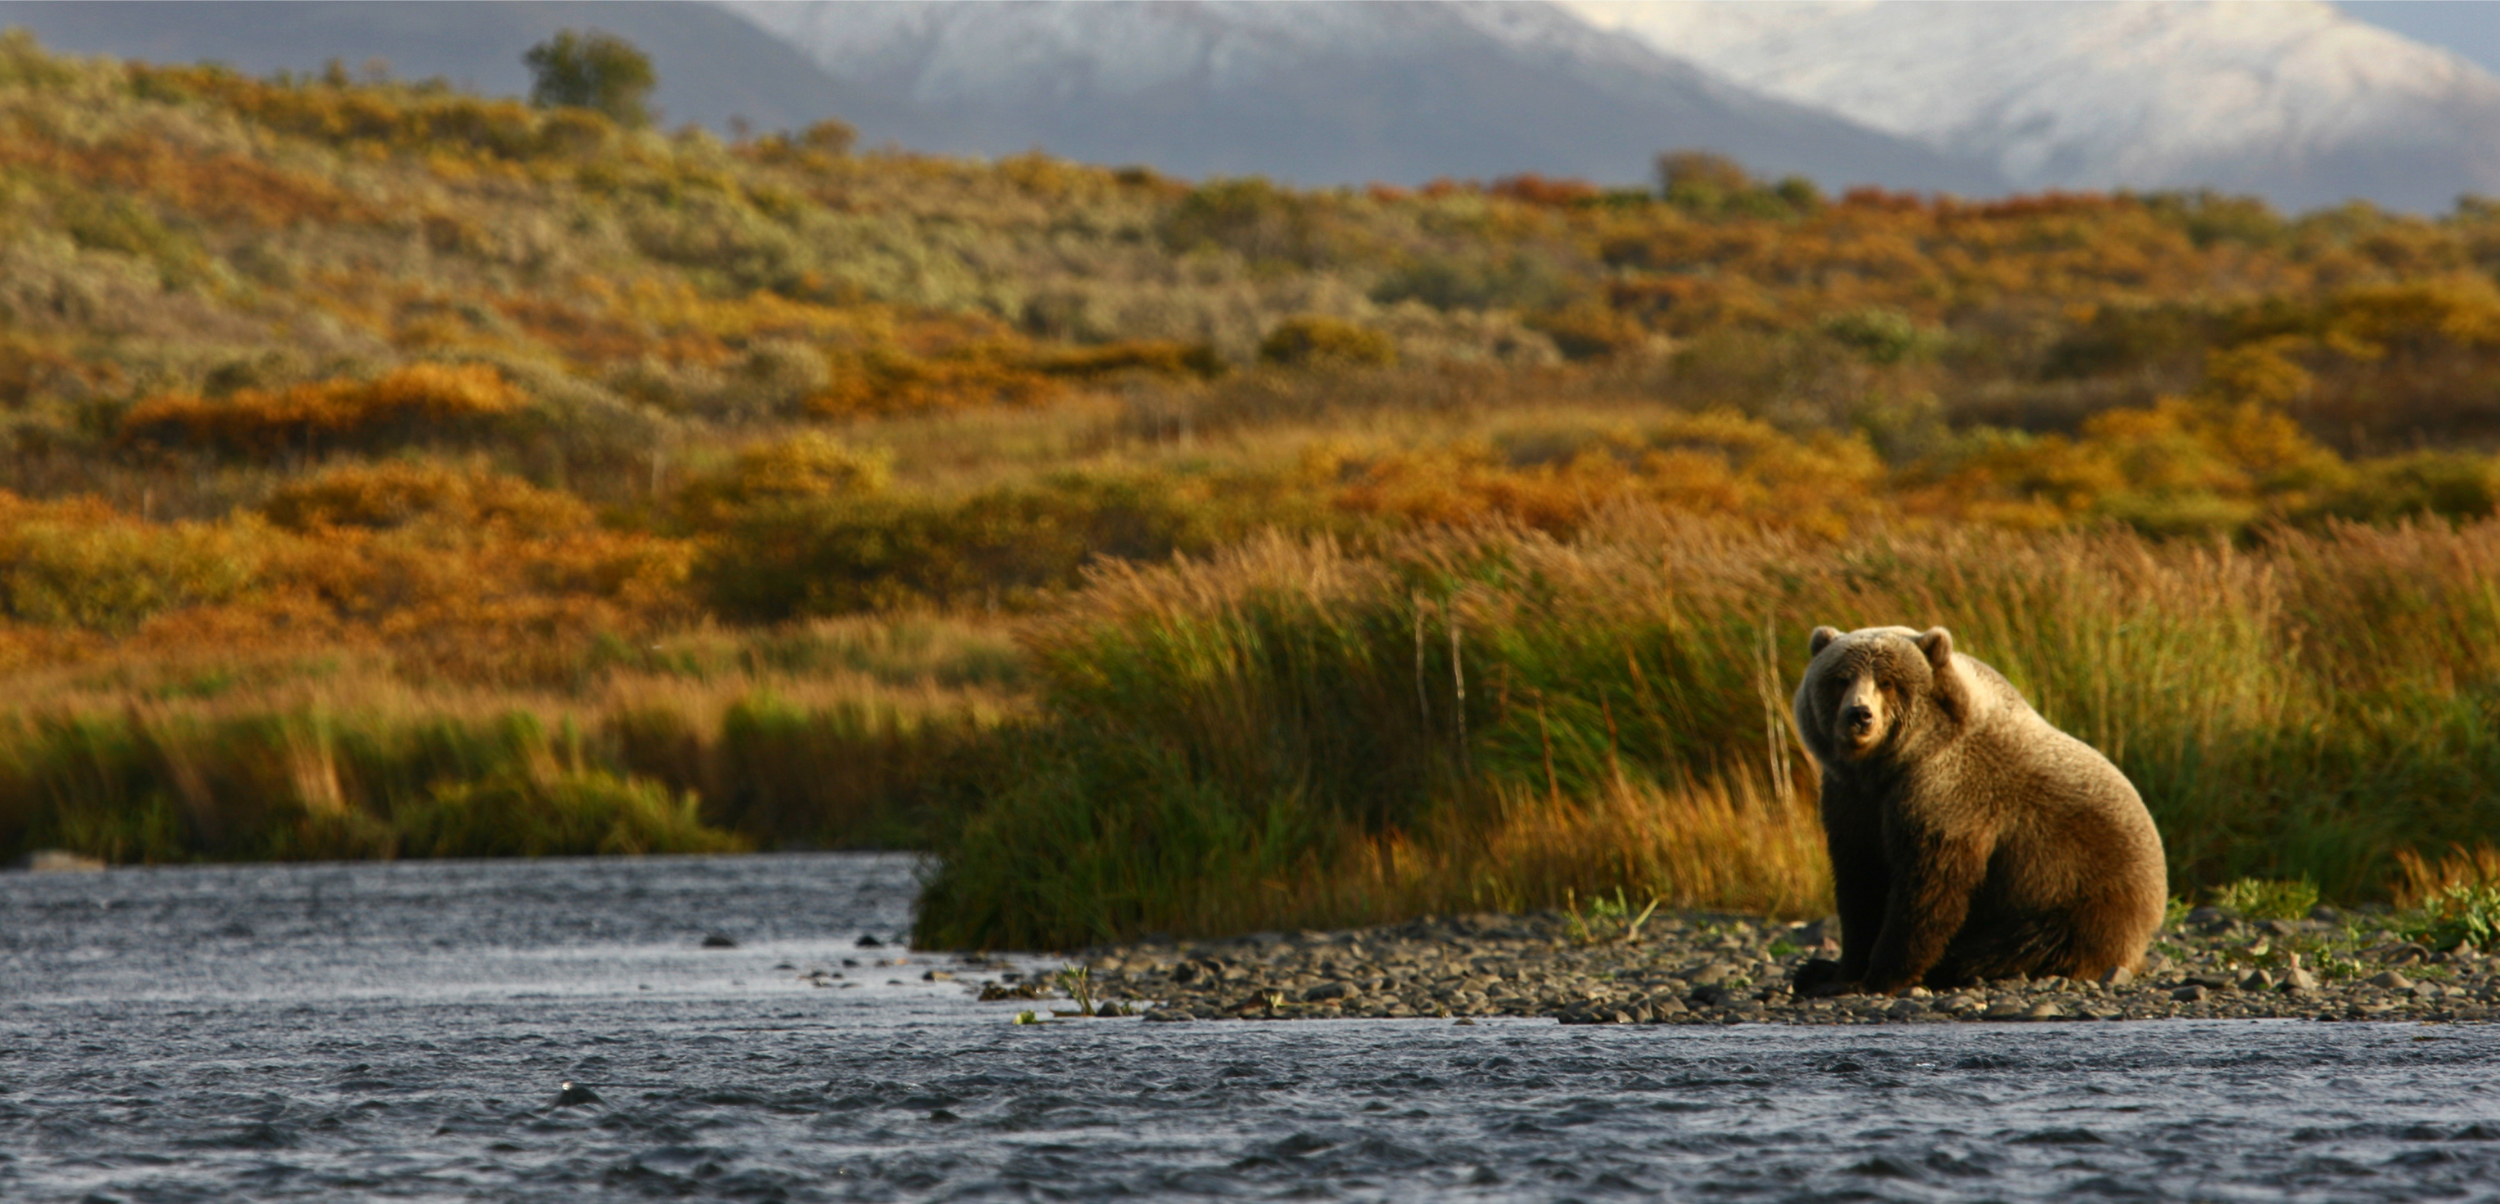   Kodiak Grizzly Brown Bear | Kodiak Marine Charters   Access remote hunting areas around Kodiak, Alaska!  We do drop off/pick up transportation trips or can offer a full package including transportation, lodging and meals for the duration of your DI